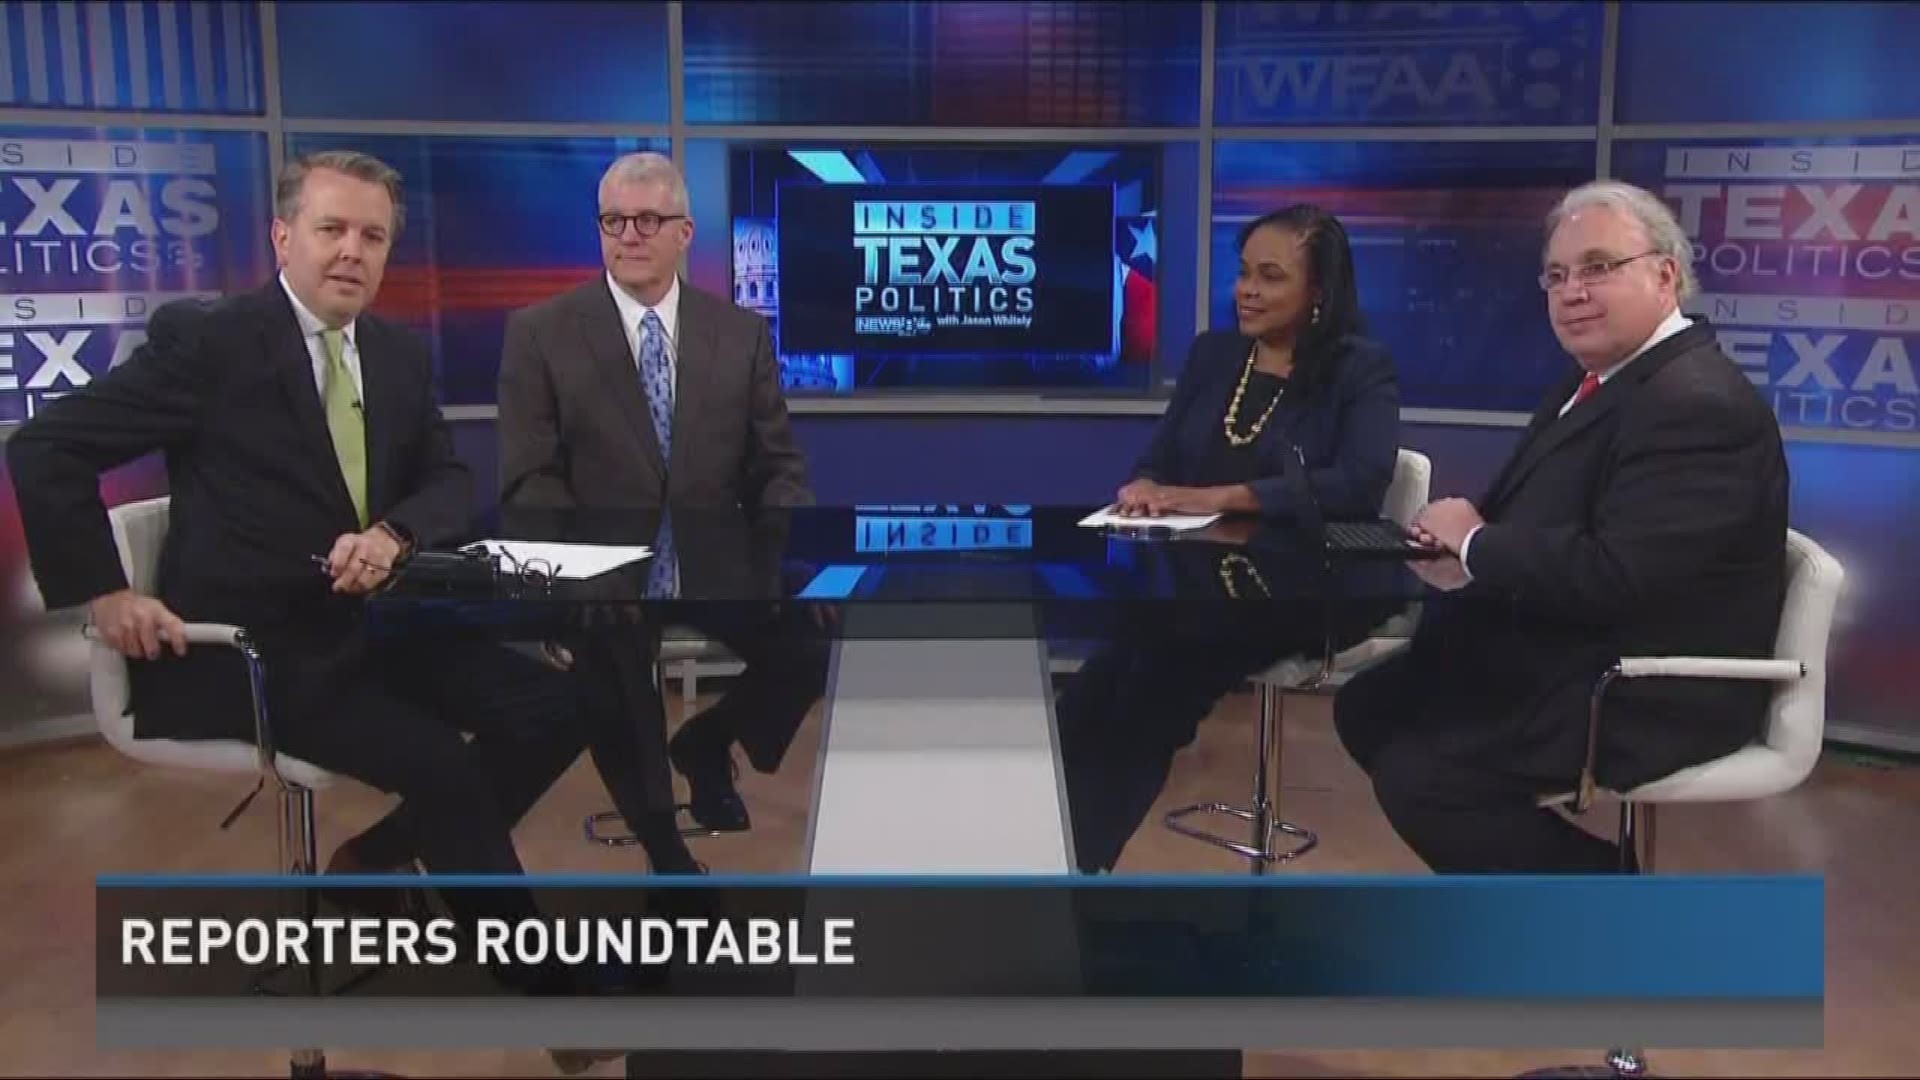 Reporters Roundtable puts the headlines in perspective each week. Host Jason, Bud and Ross returned along with Berna Dean Steptoe, WFAA's political producer.  They shared their thoughts on the legacy of former first lady Barbara Bush. Mrs. Bush died last 